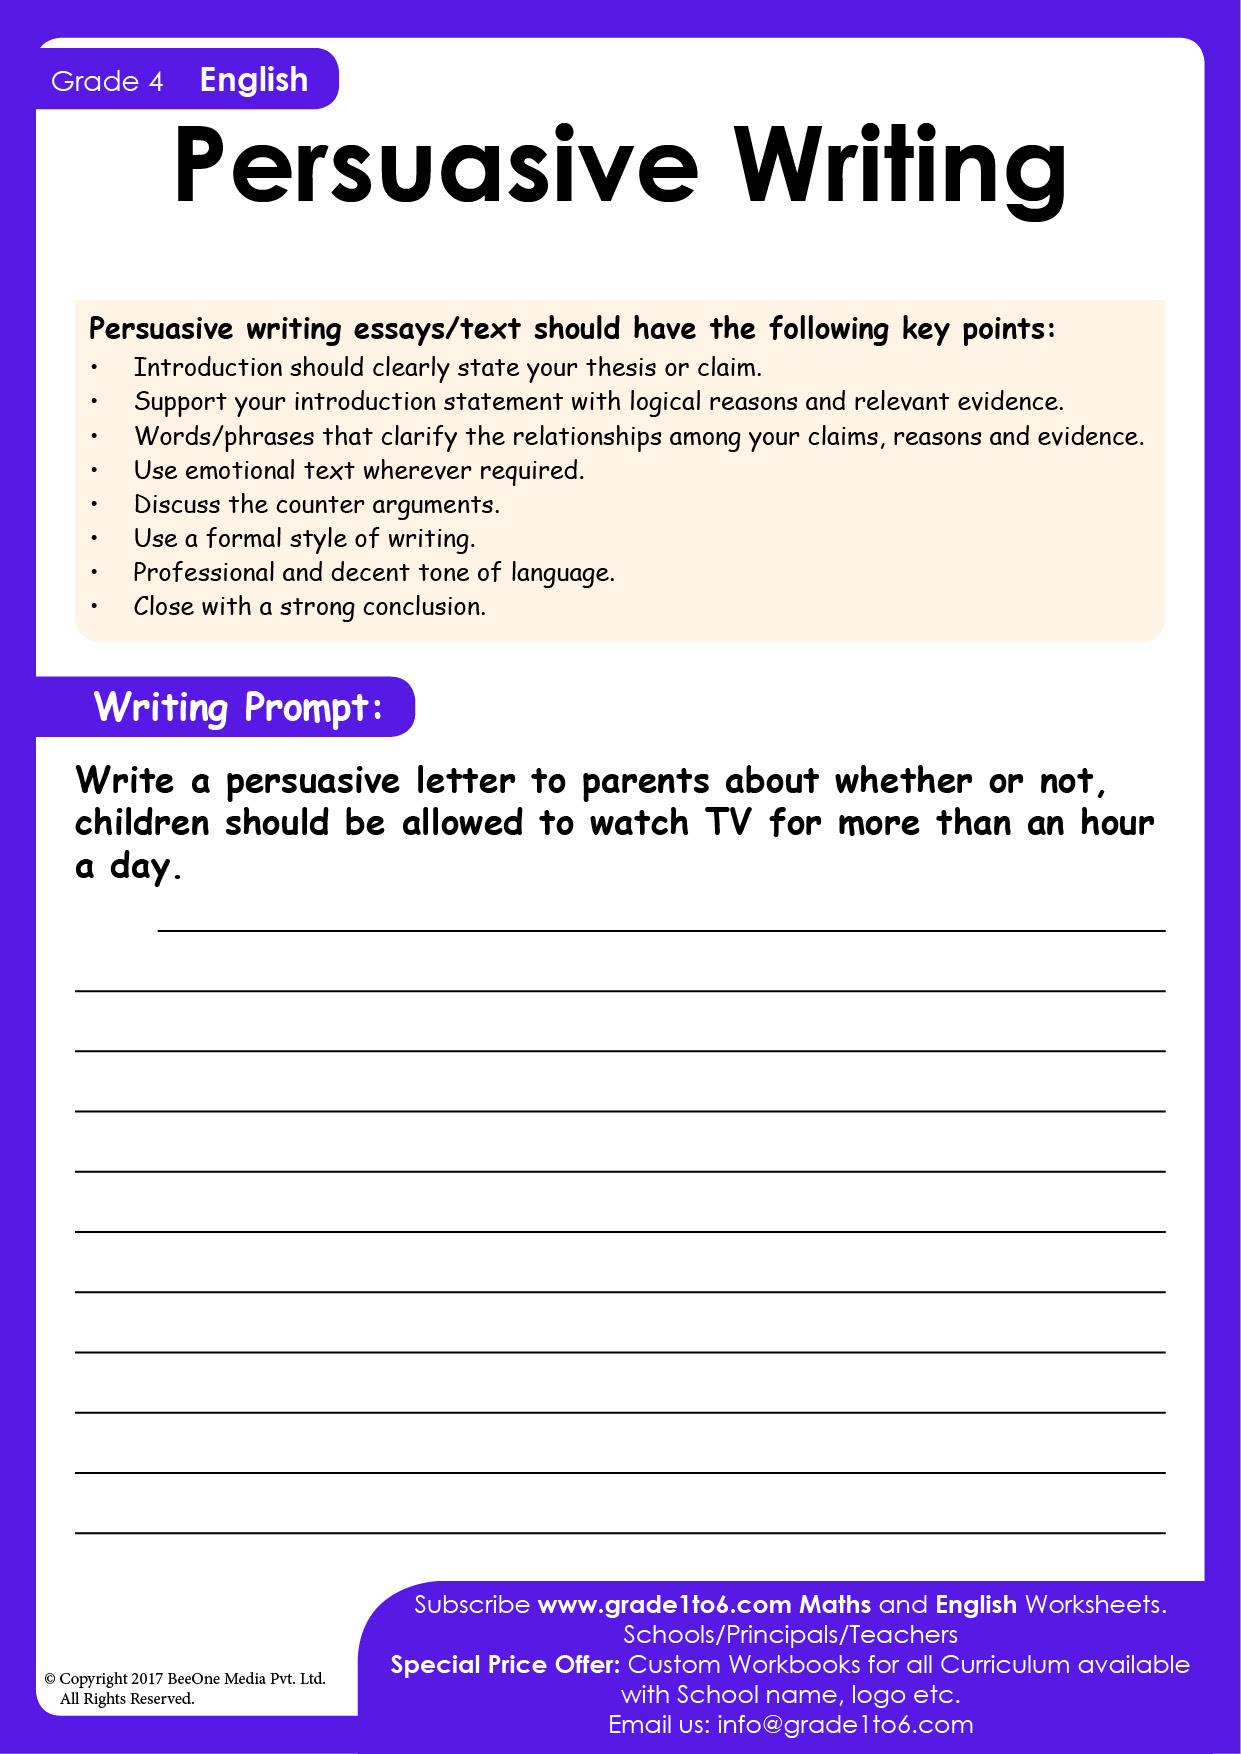 persuasive-words-year-6-35-persuasive-words-and-phrases-to-use-in